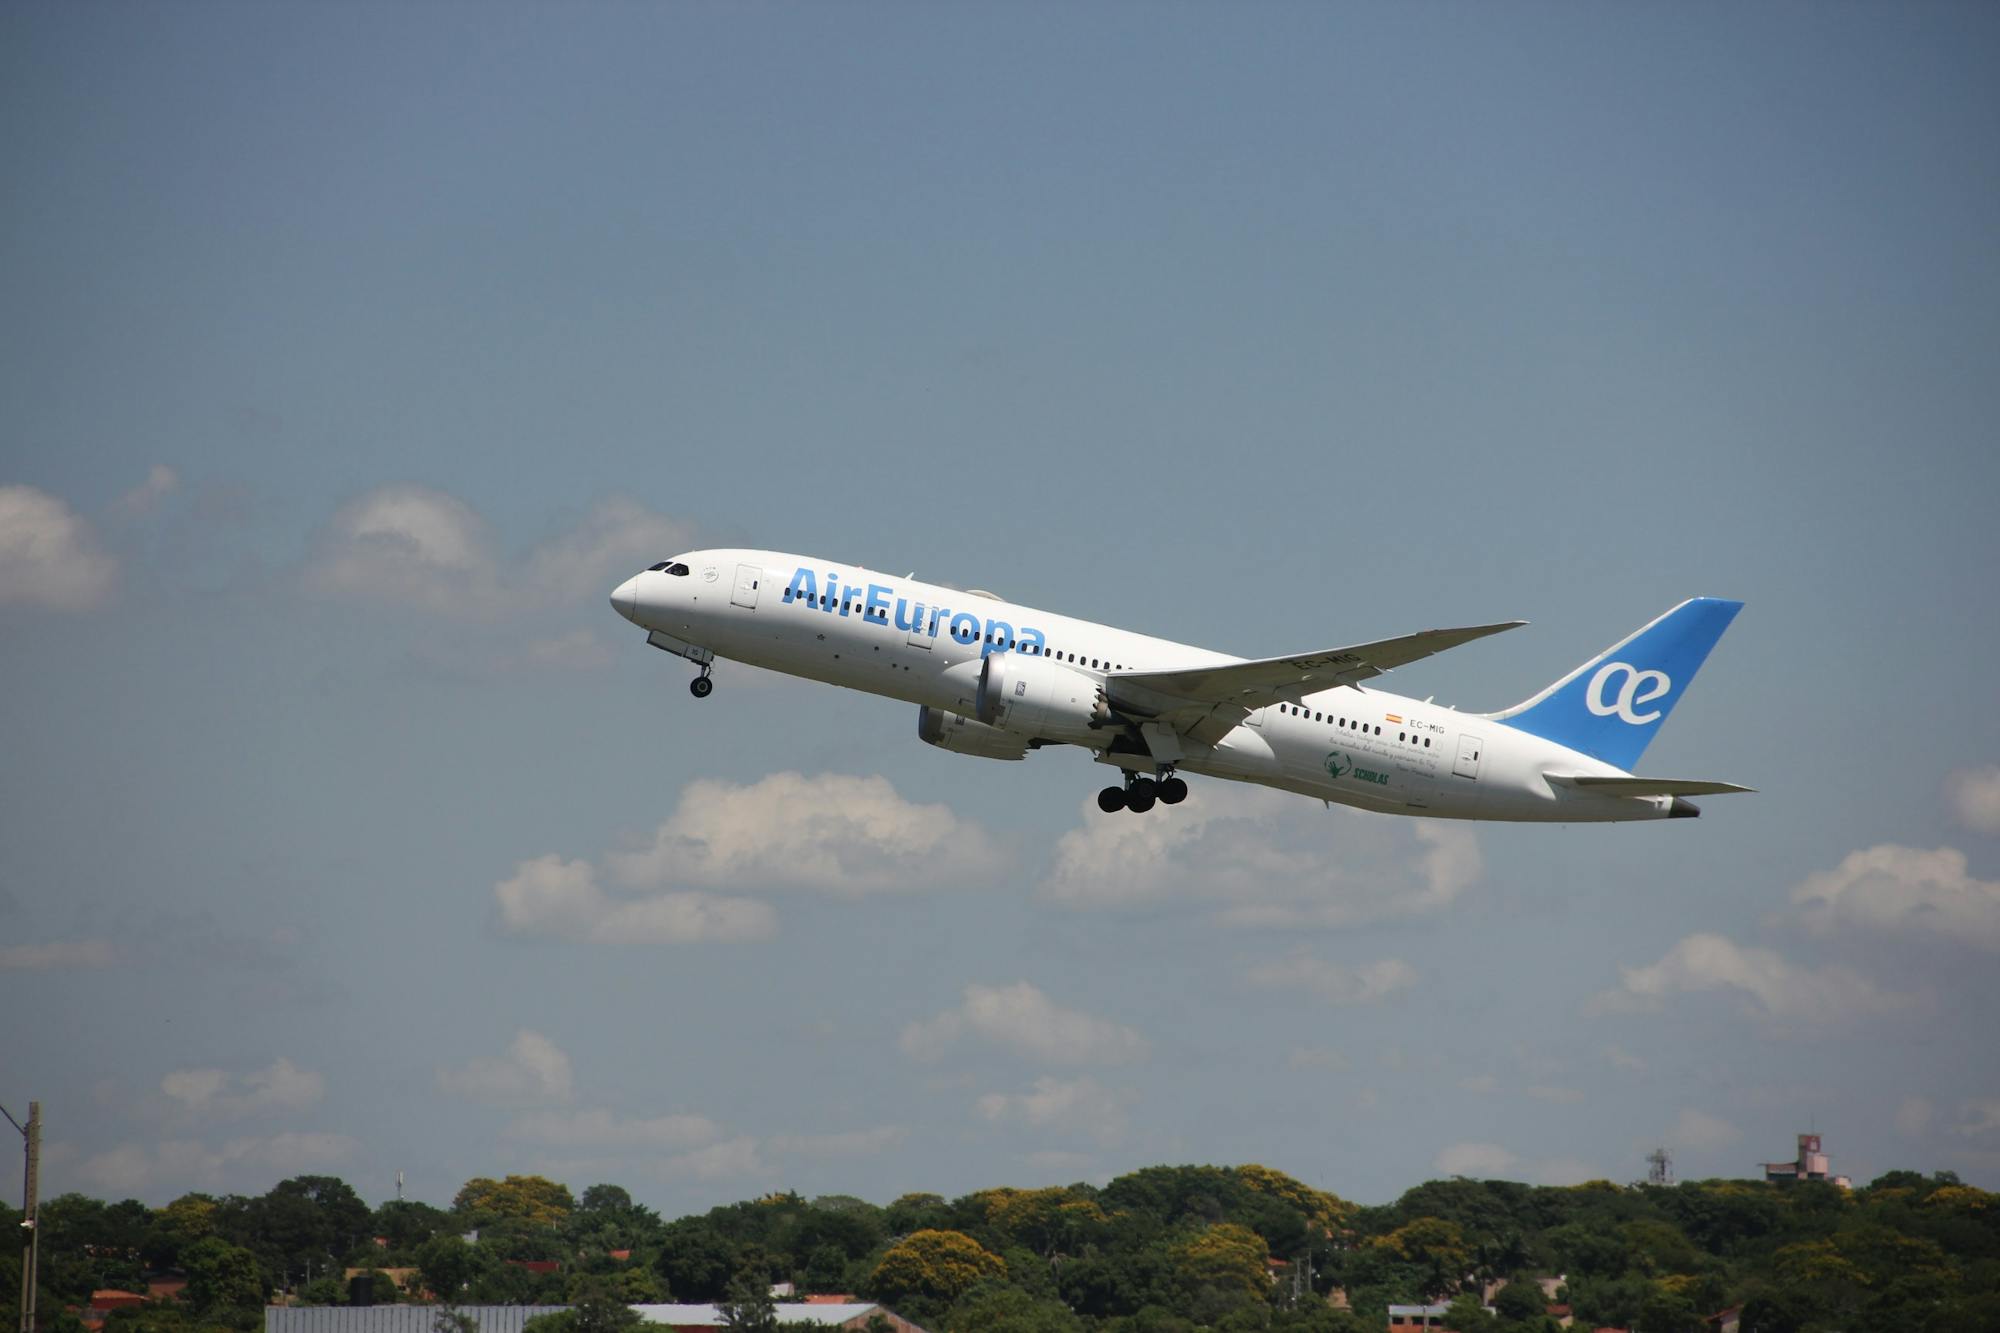 An AirEuropa airplane is taking off